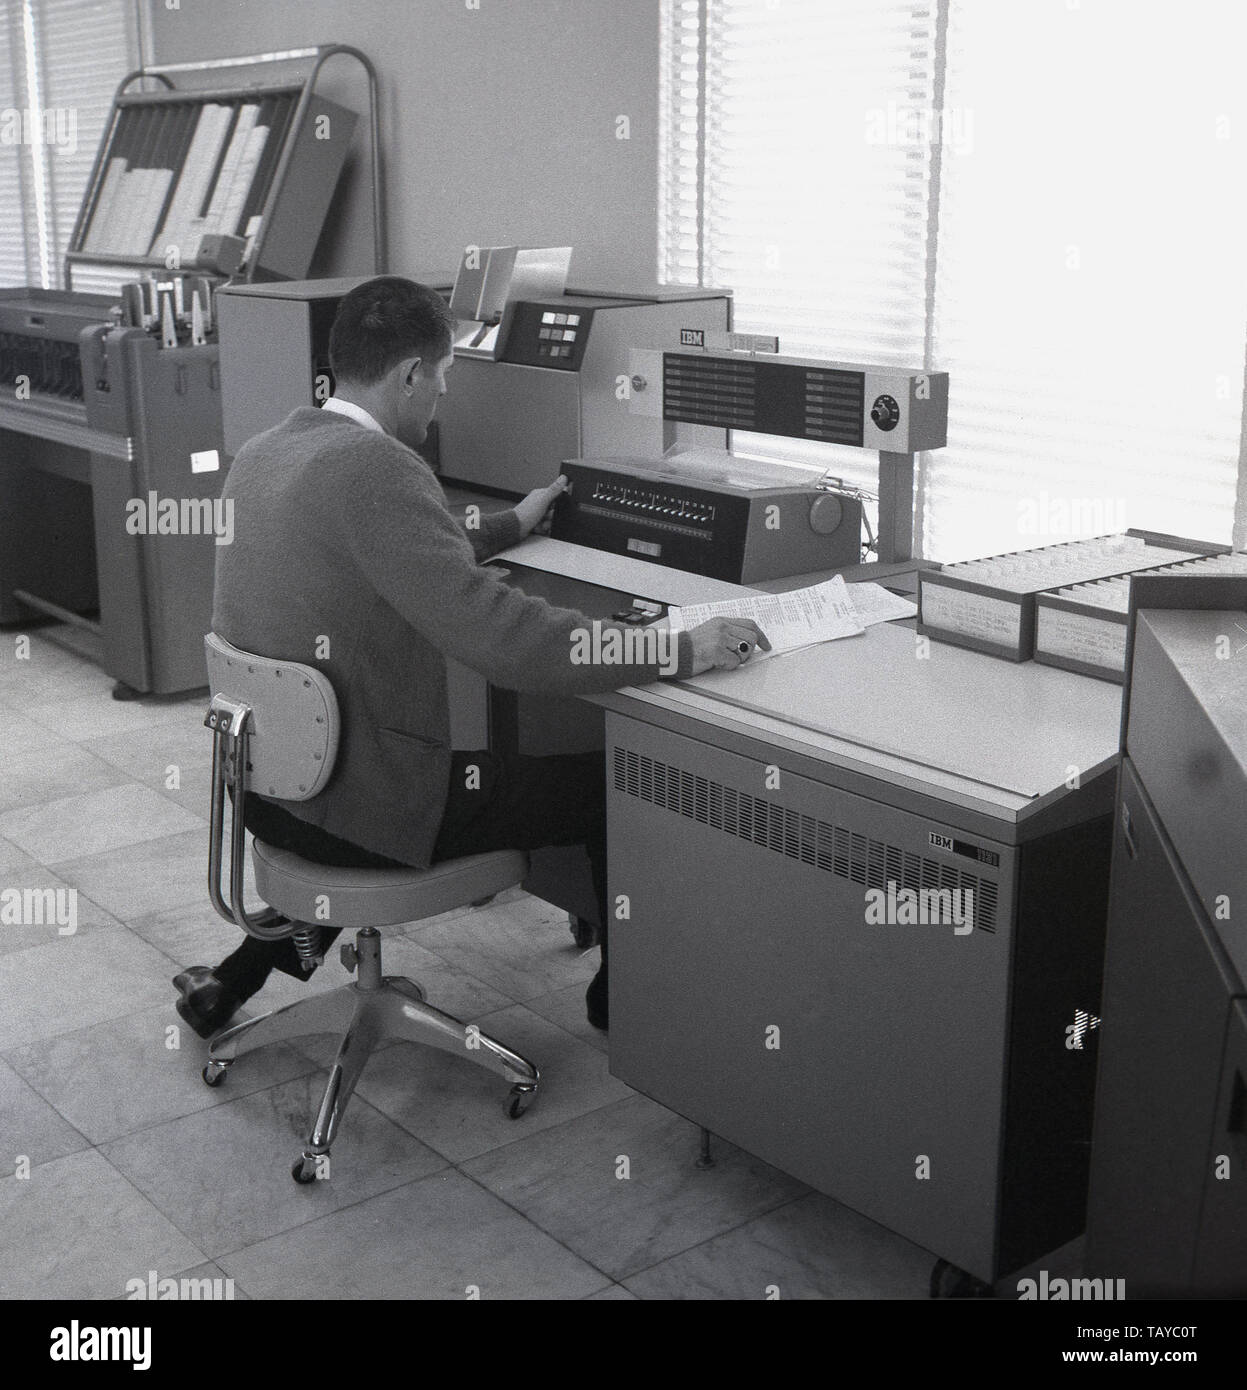 Mid 1960s, historical, a man working at the console of an IBM 1130 computing system, with other peripheral equipment in the room. Introduced in 1965, the 1130 was aimed at education and engineering and scientific markets. The 1131 central processing unit (CPU) was the primary processing component of the IBM 1130 and was built into a free-standing, desk-like enclosure, seen on the right of the operator in the picture. The CPU was based on hard-coded logic (SLT) modules and 'core memory', the highest-performing memory device available at the time. Stock Photo